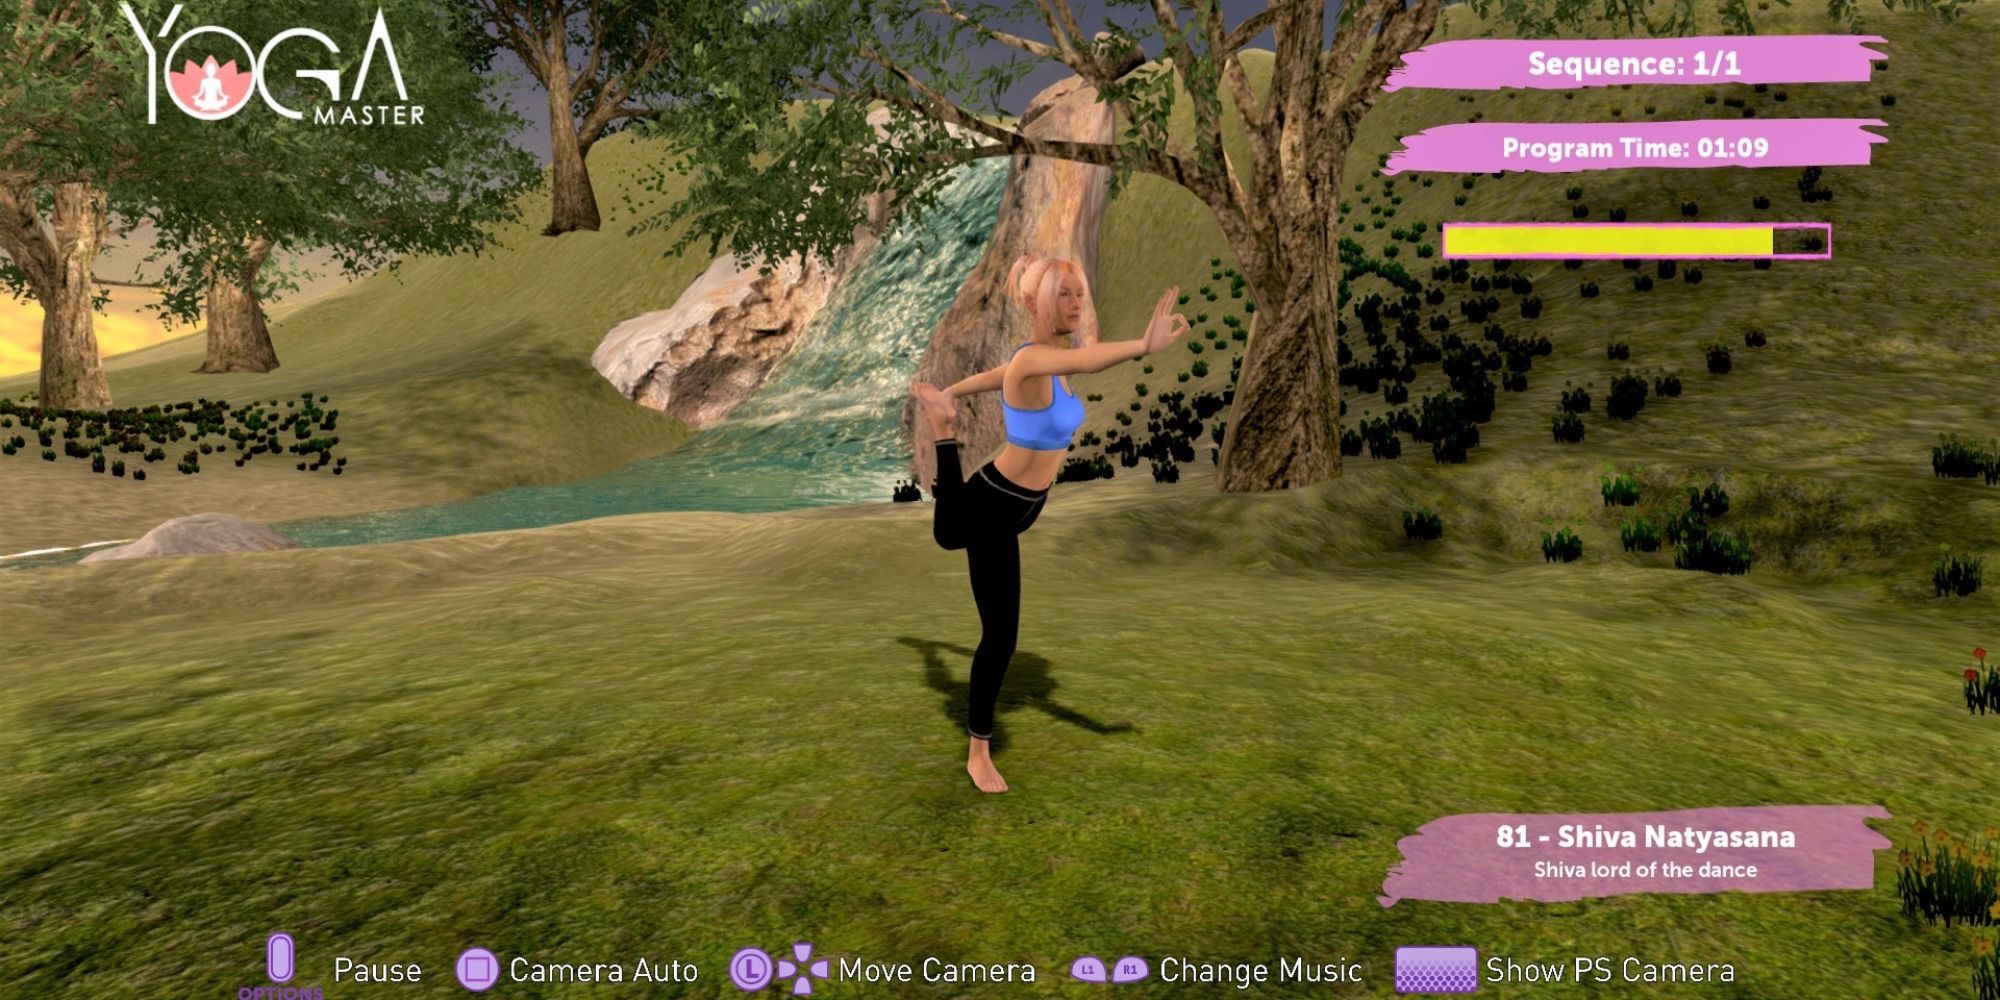 Yoga Master gameplay with instructor in a pose in a forest